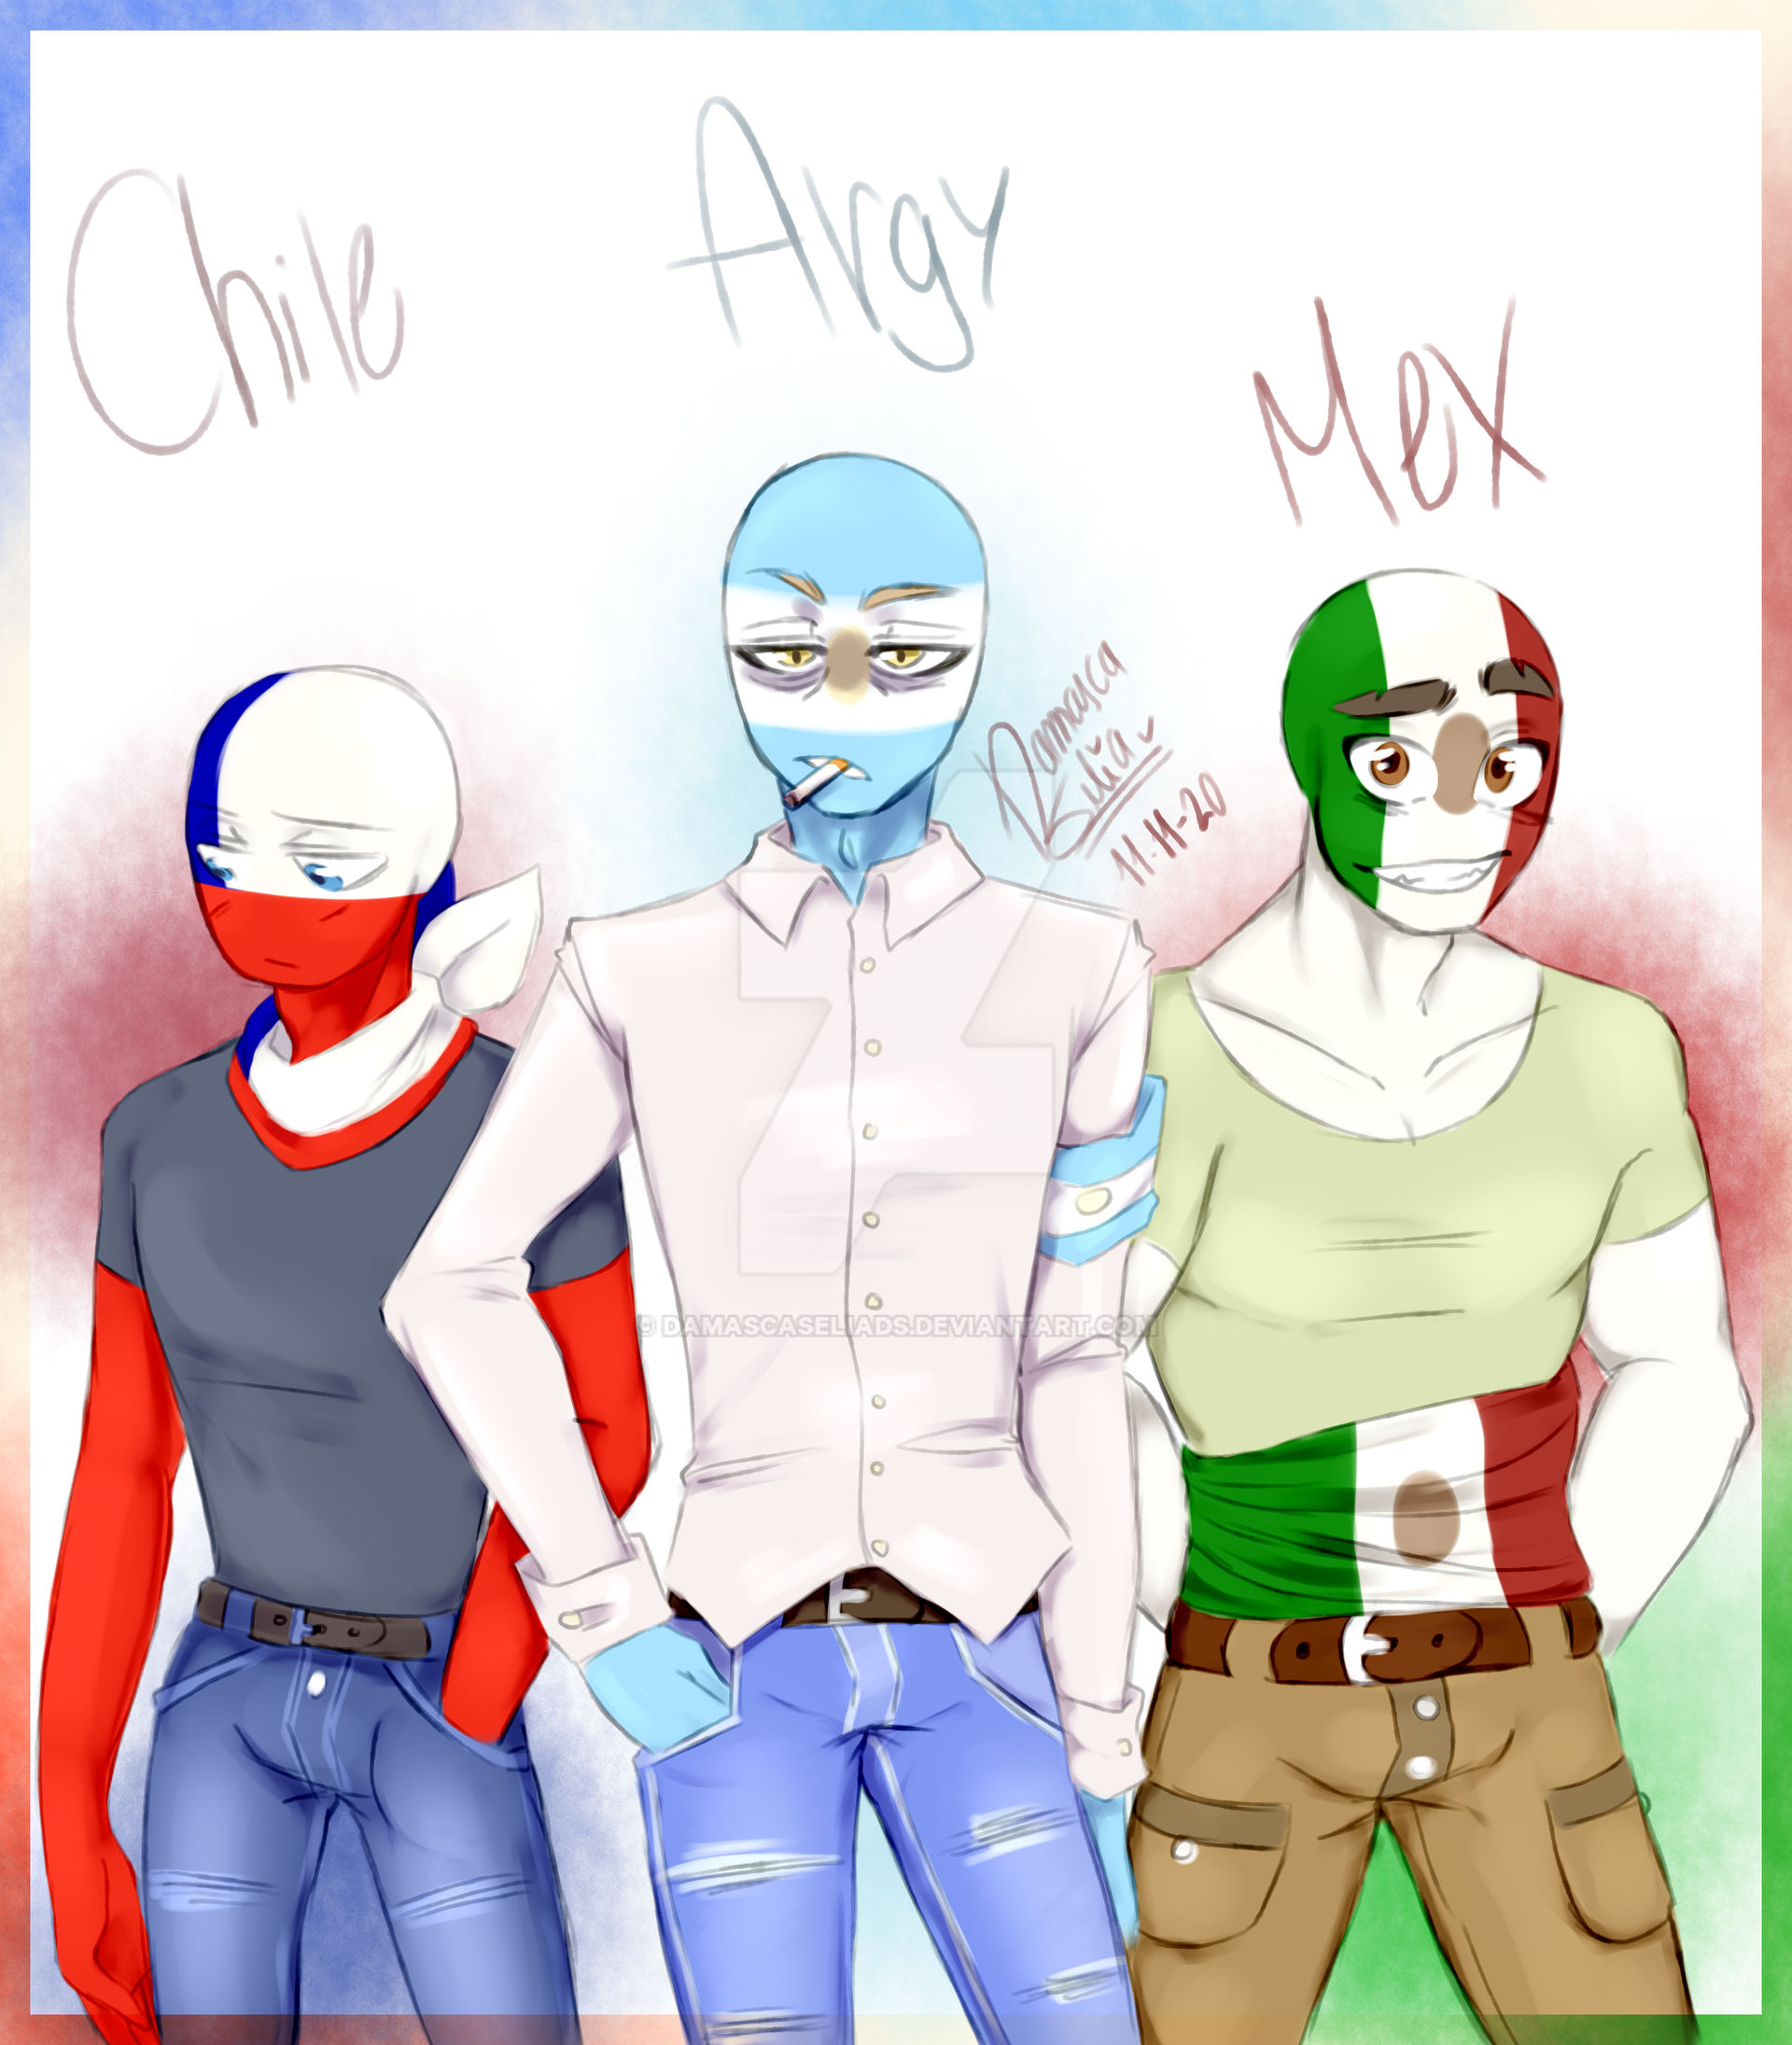 Italy and Argentina - CountryHumans by SugarTC on DeviantArt